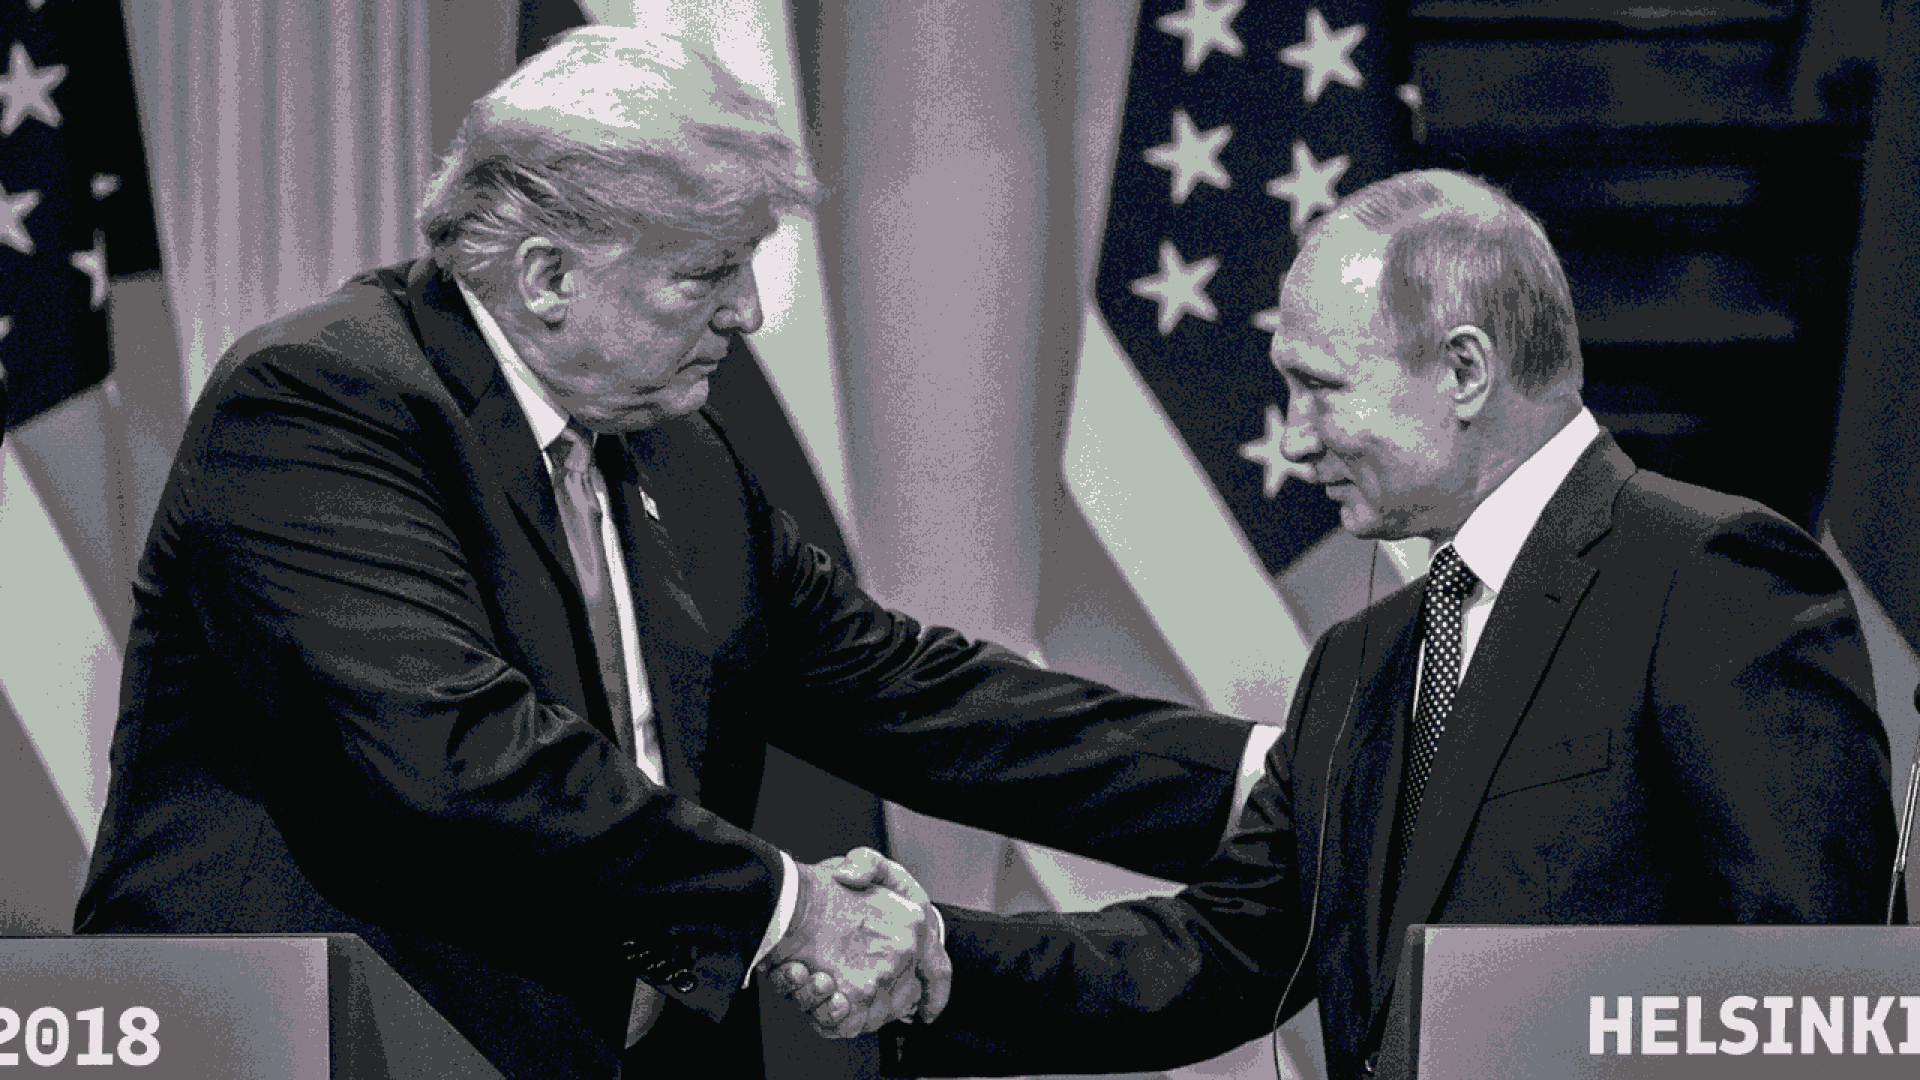 Animated GIF of glitching photo President Trump and President Putin meeting in Helsinki